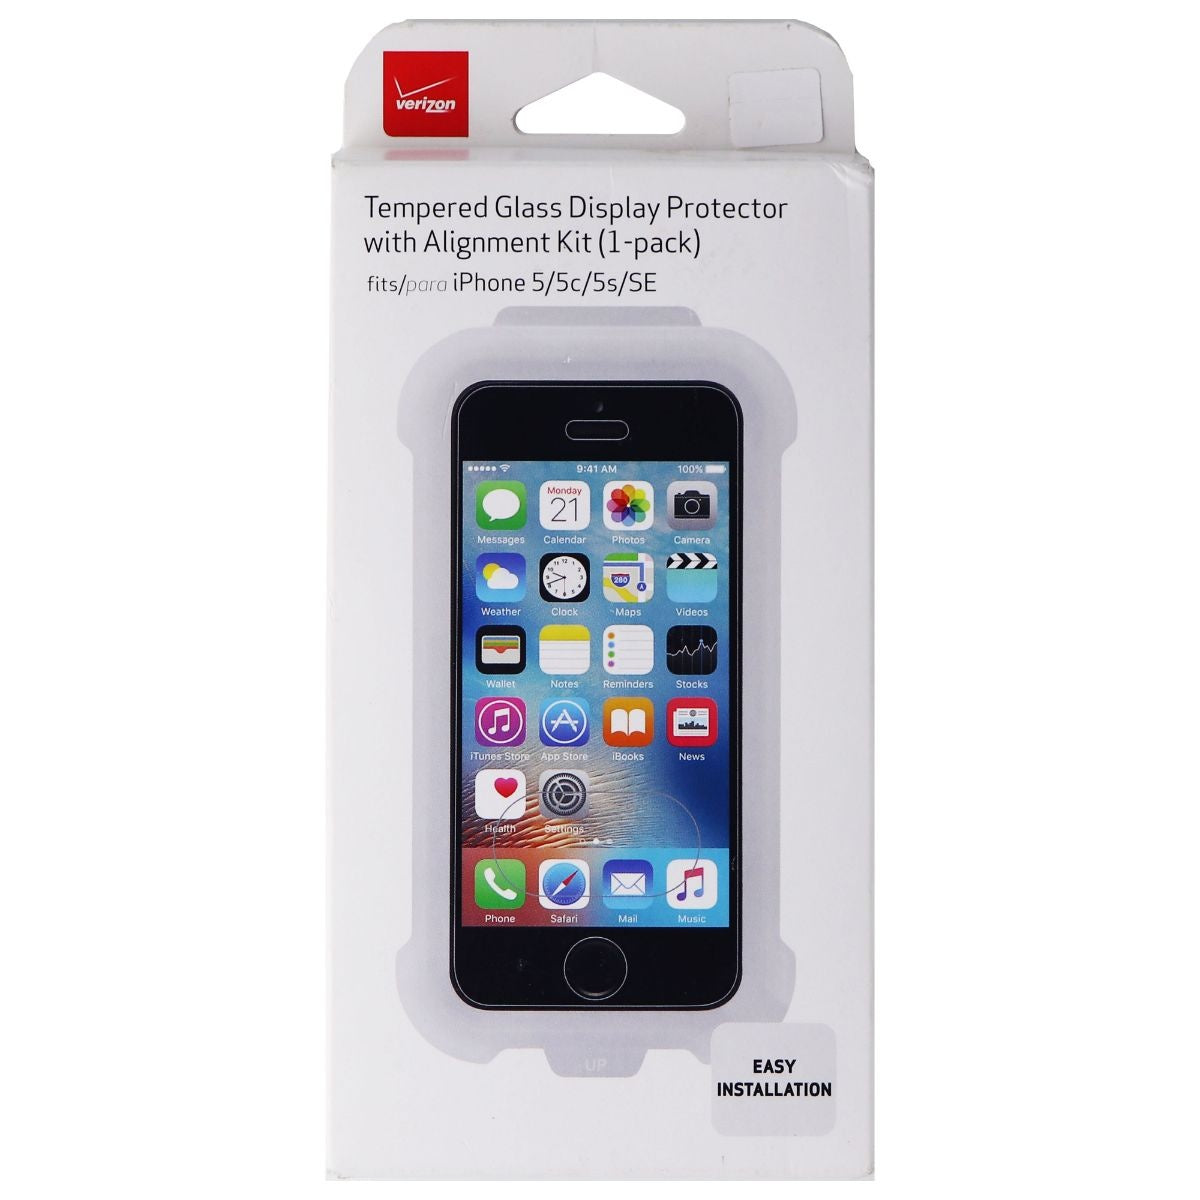 Verizon Tempered Glass Display Protector w/ Alignment Kit for iPhone SE / 5s / 5